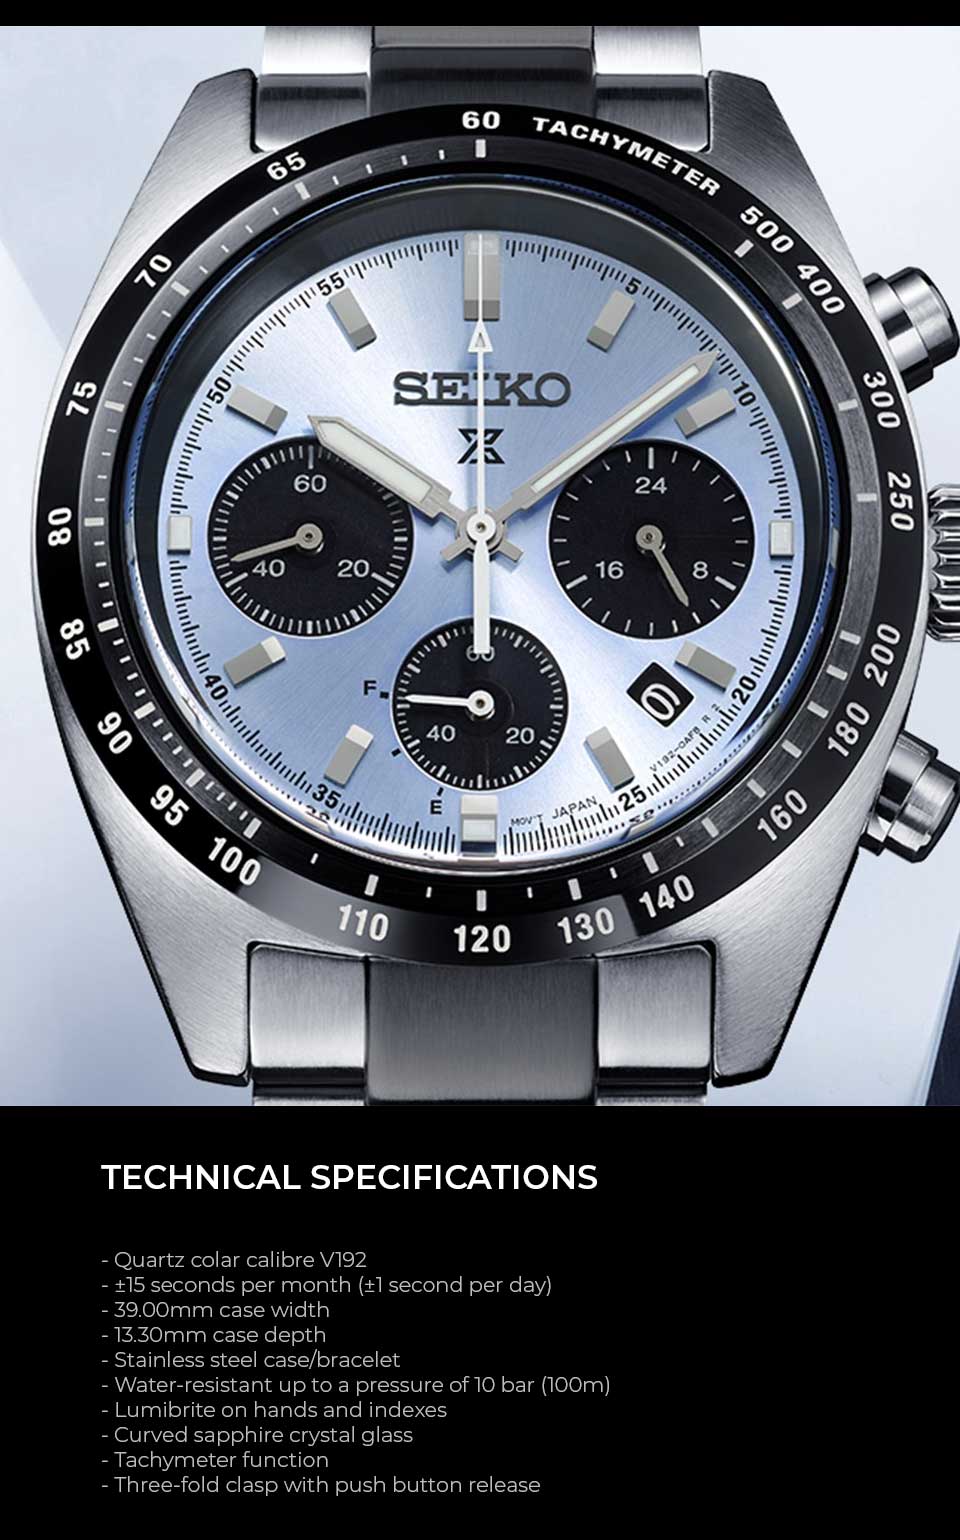 Pre-Order Now! The Limited Edition Seiko Prospex Speedtimer 'Crystal  Trophy' - First Class Watches